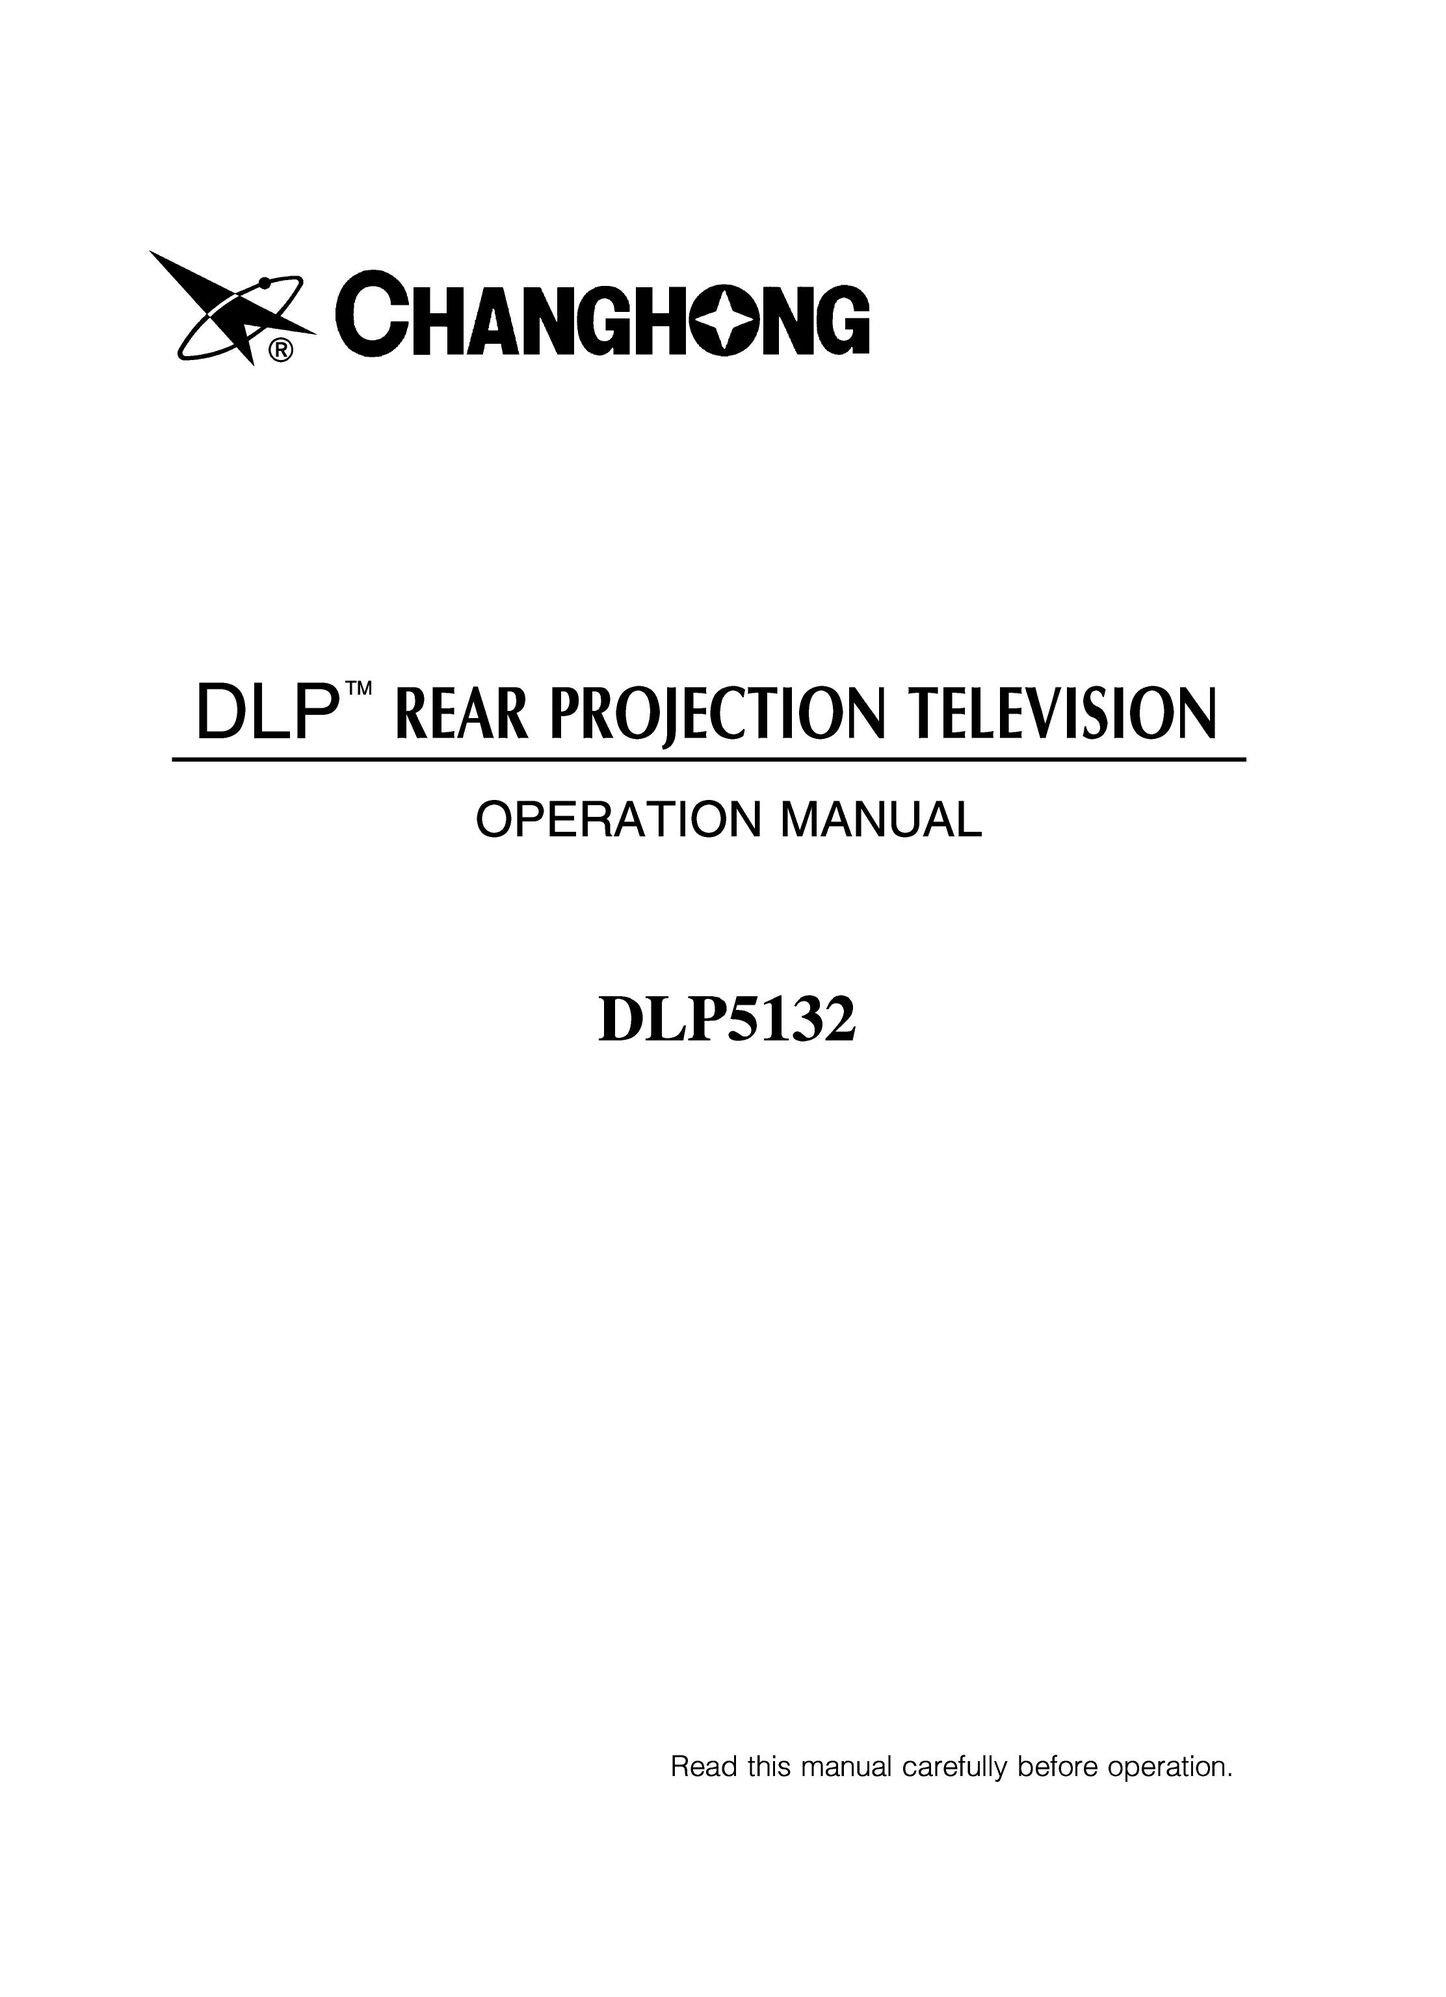 Changhong Electric DLP5132 Projection Television User Manual